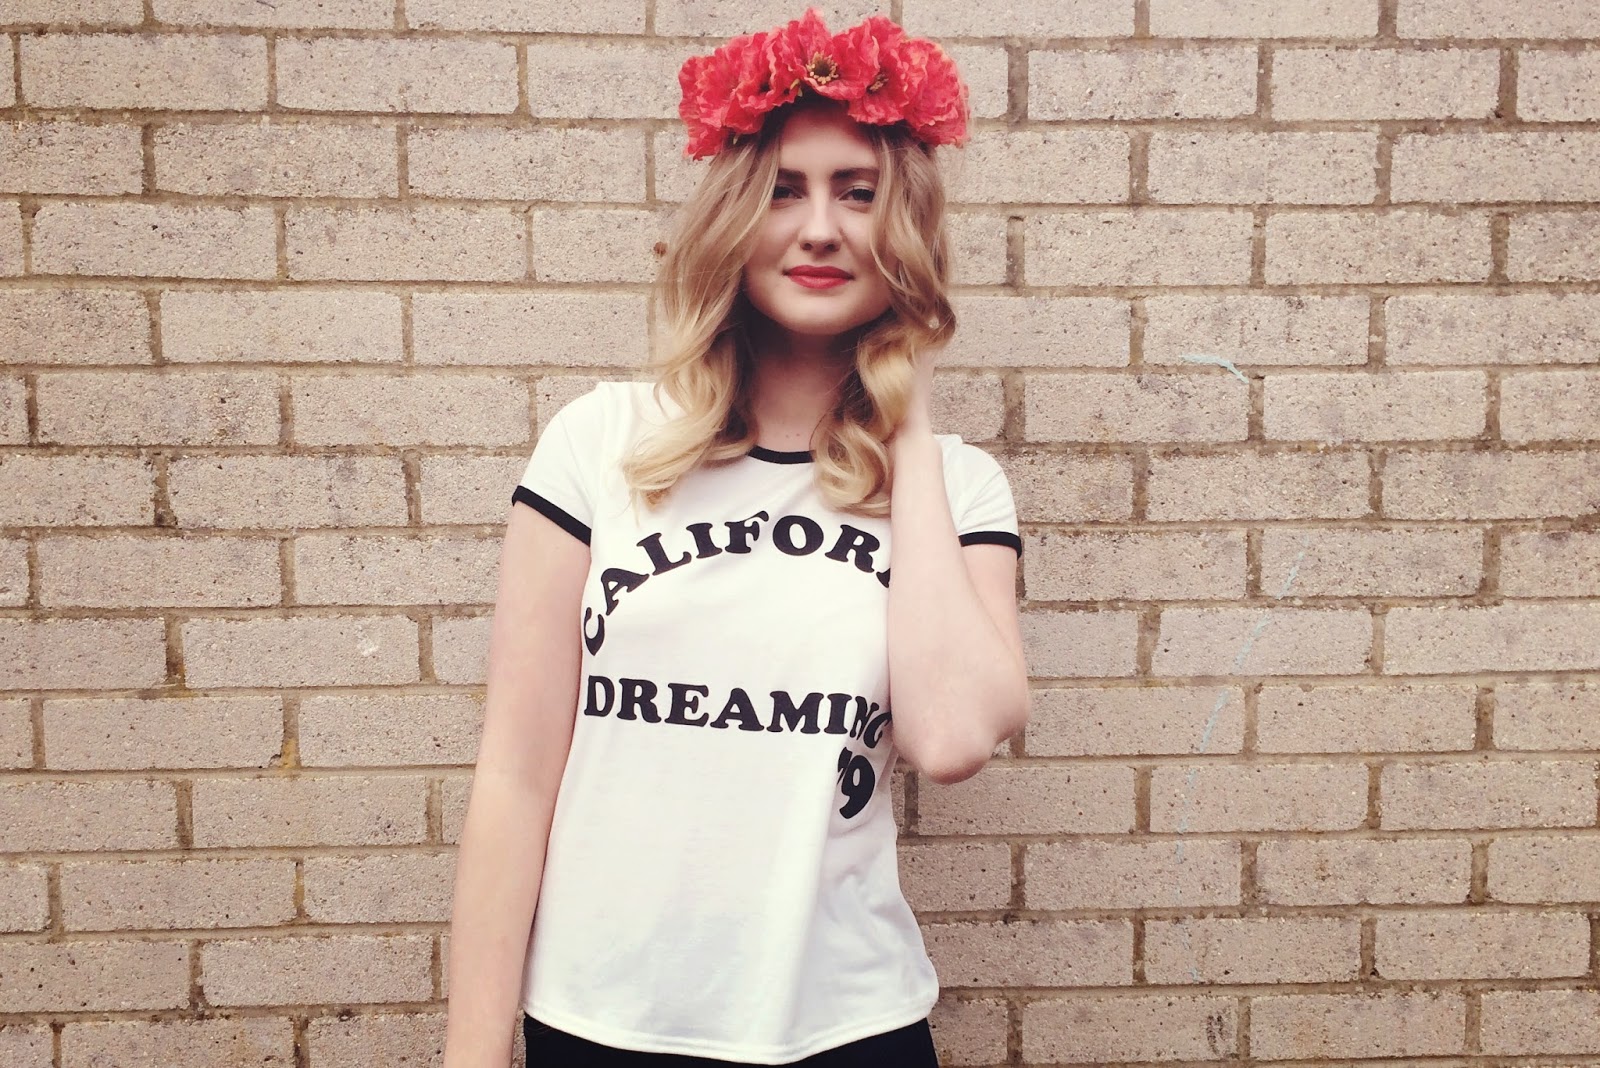 FashionFake, a UK fashion and lifestyle blog: brighten up your outfit with a bright floral head crown.